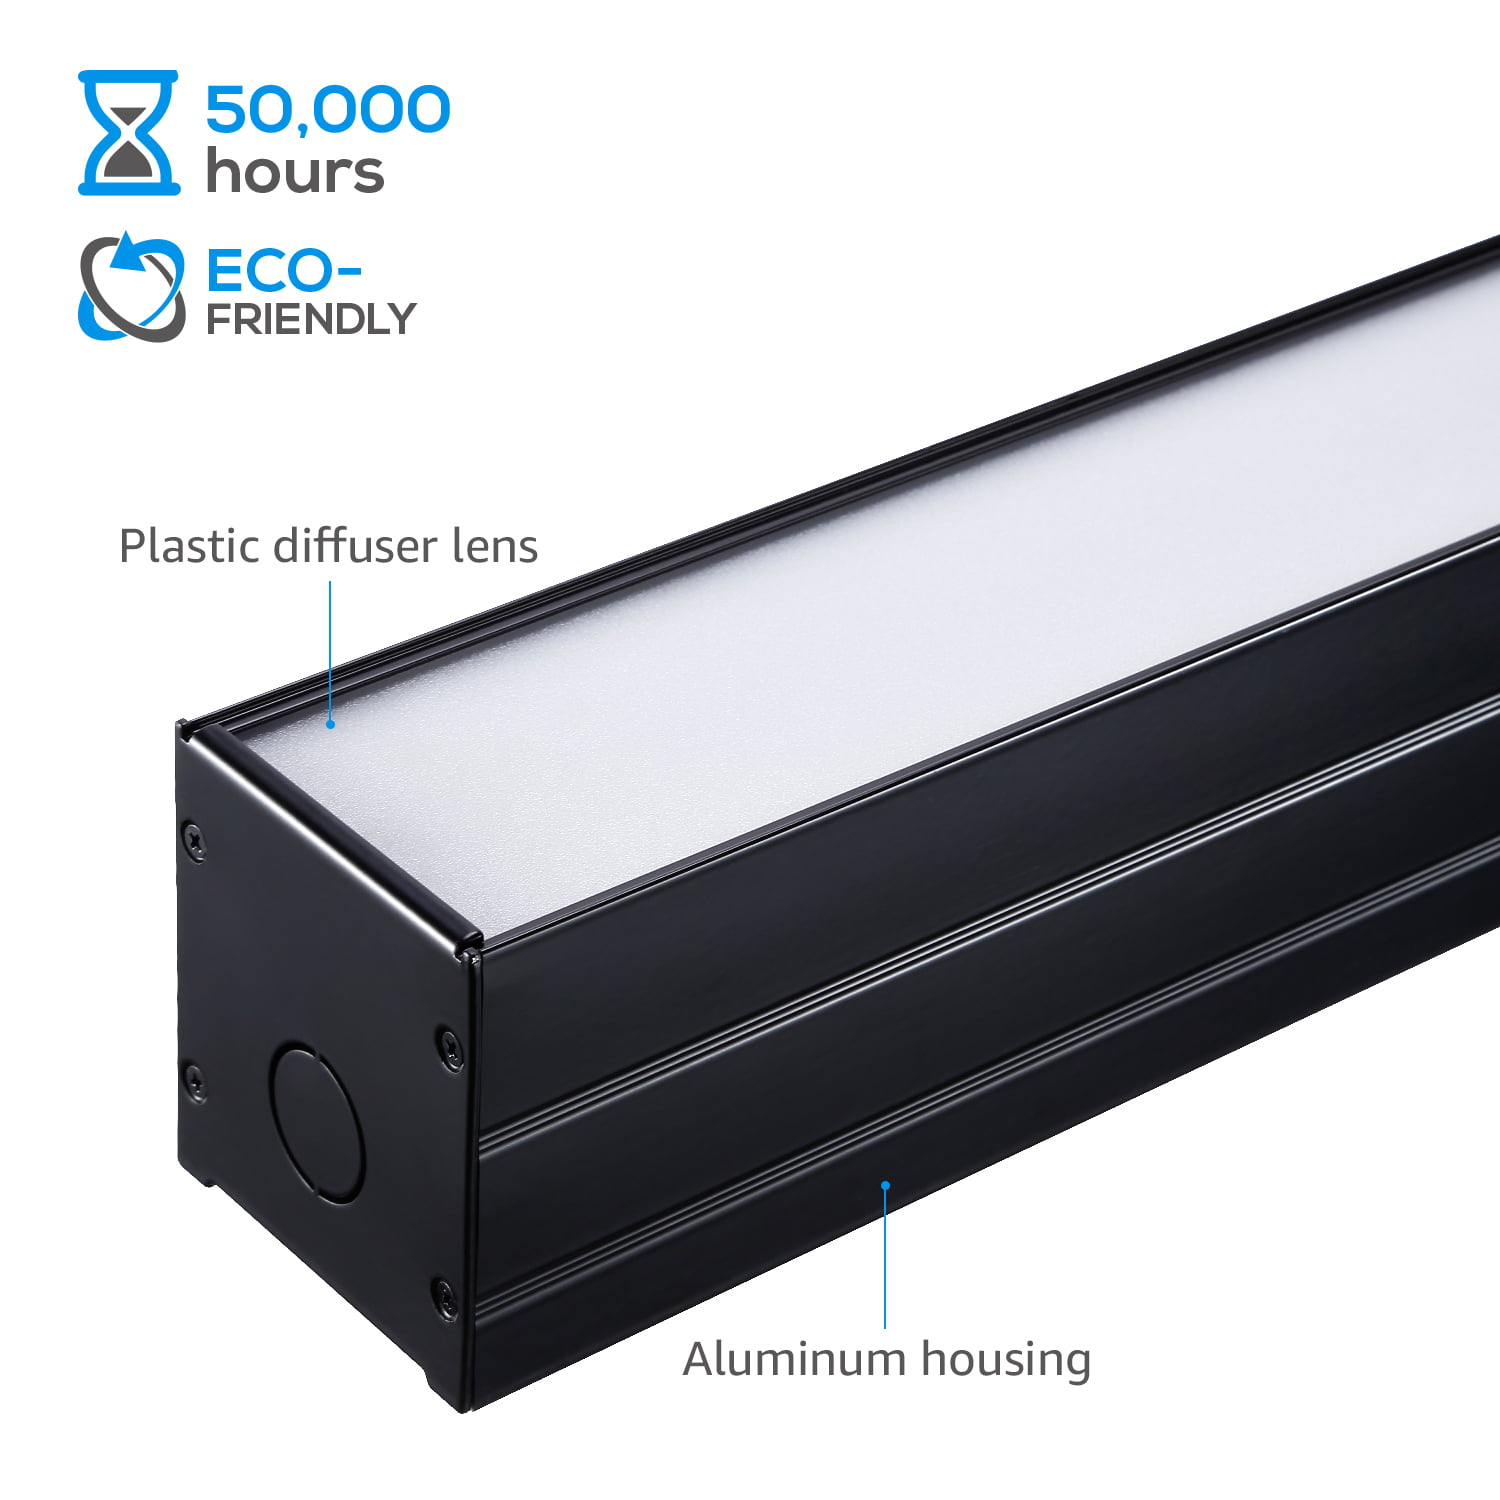 100W-230W Eq. for Office Black UL & DLC Market Garage Pack of 2 40W 4600lm Linkable Suspension Lighting Fixture LEONLITE 4ft Dimmable LED Linear Light 4000K Cool White 5 Years Warranty